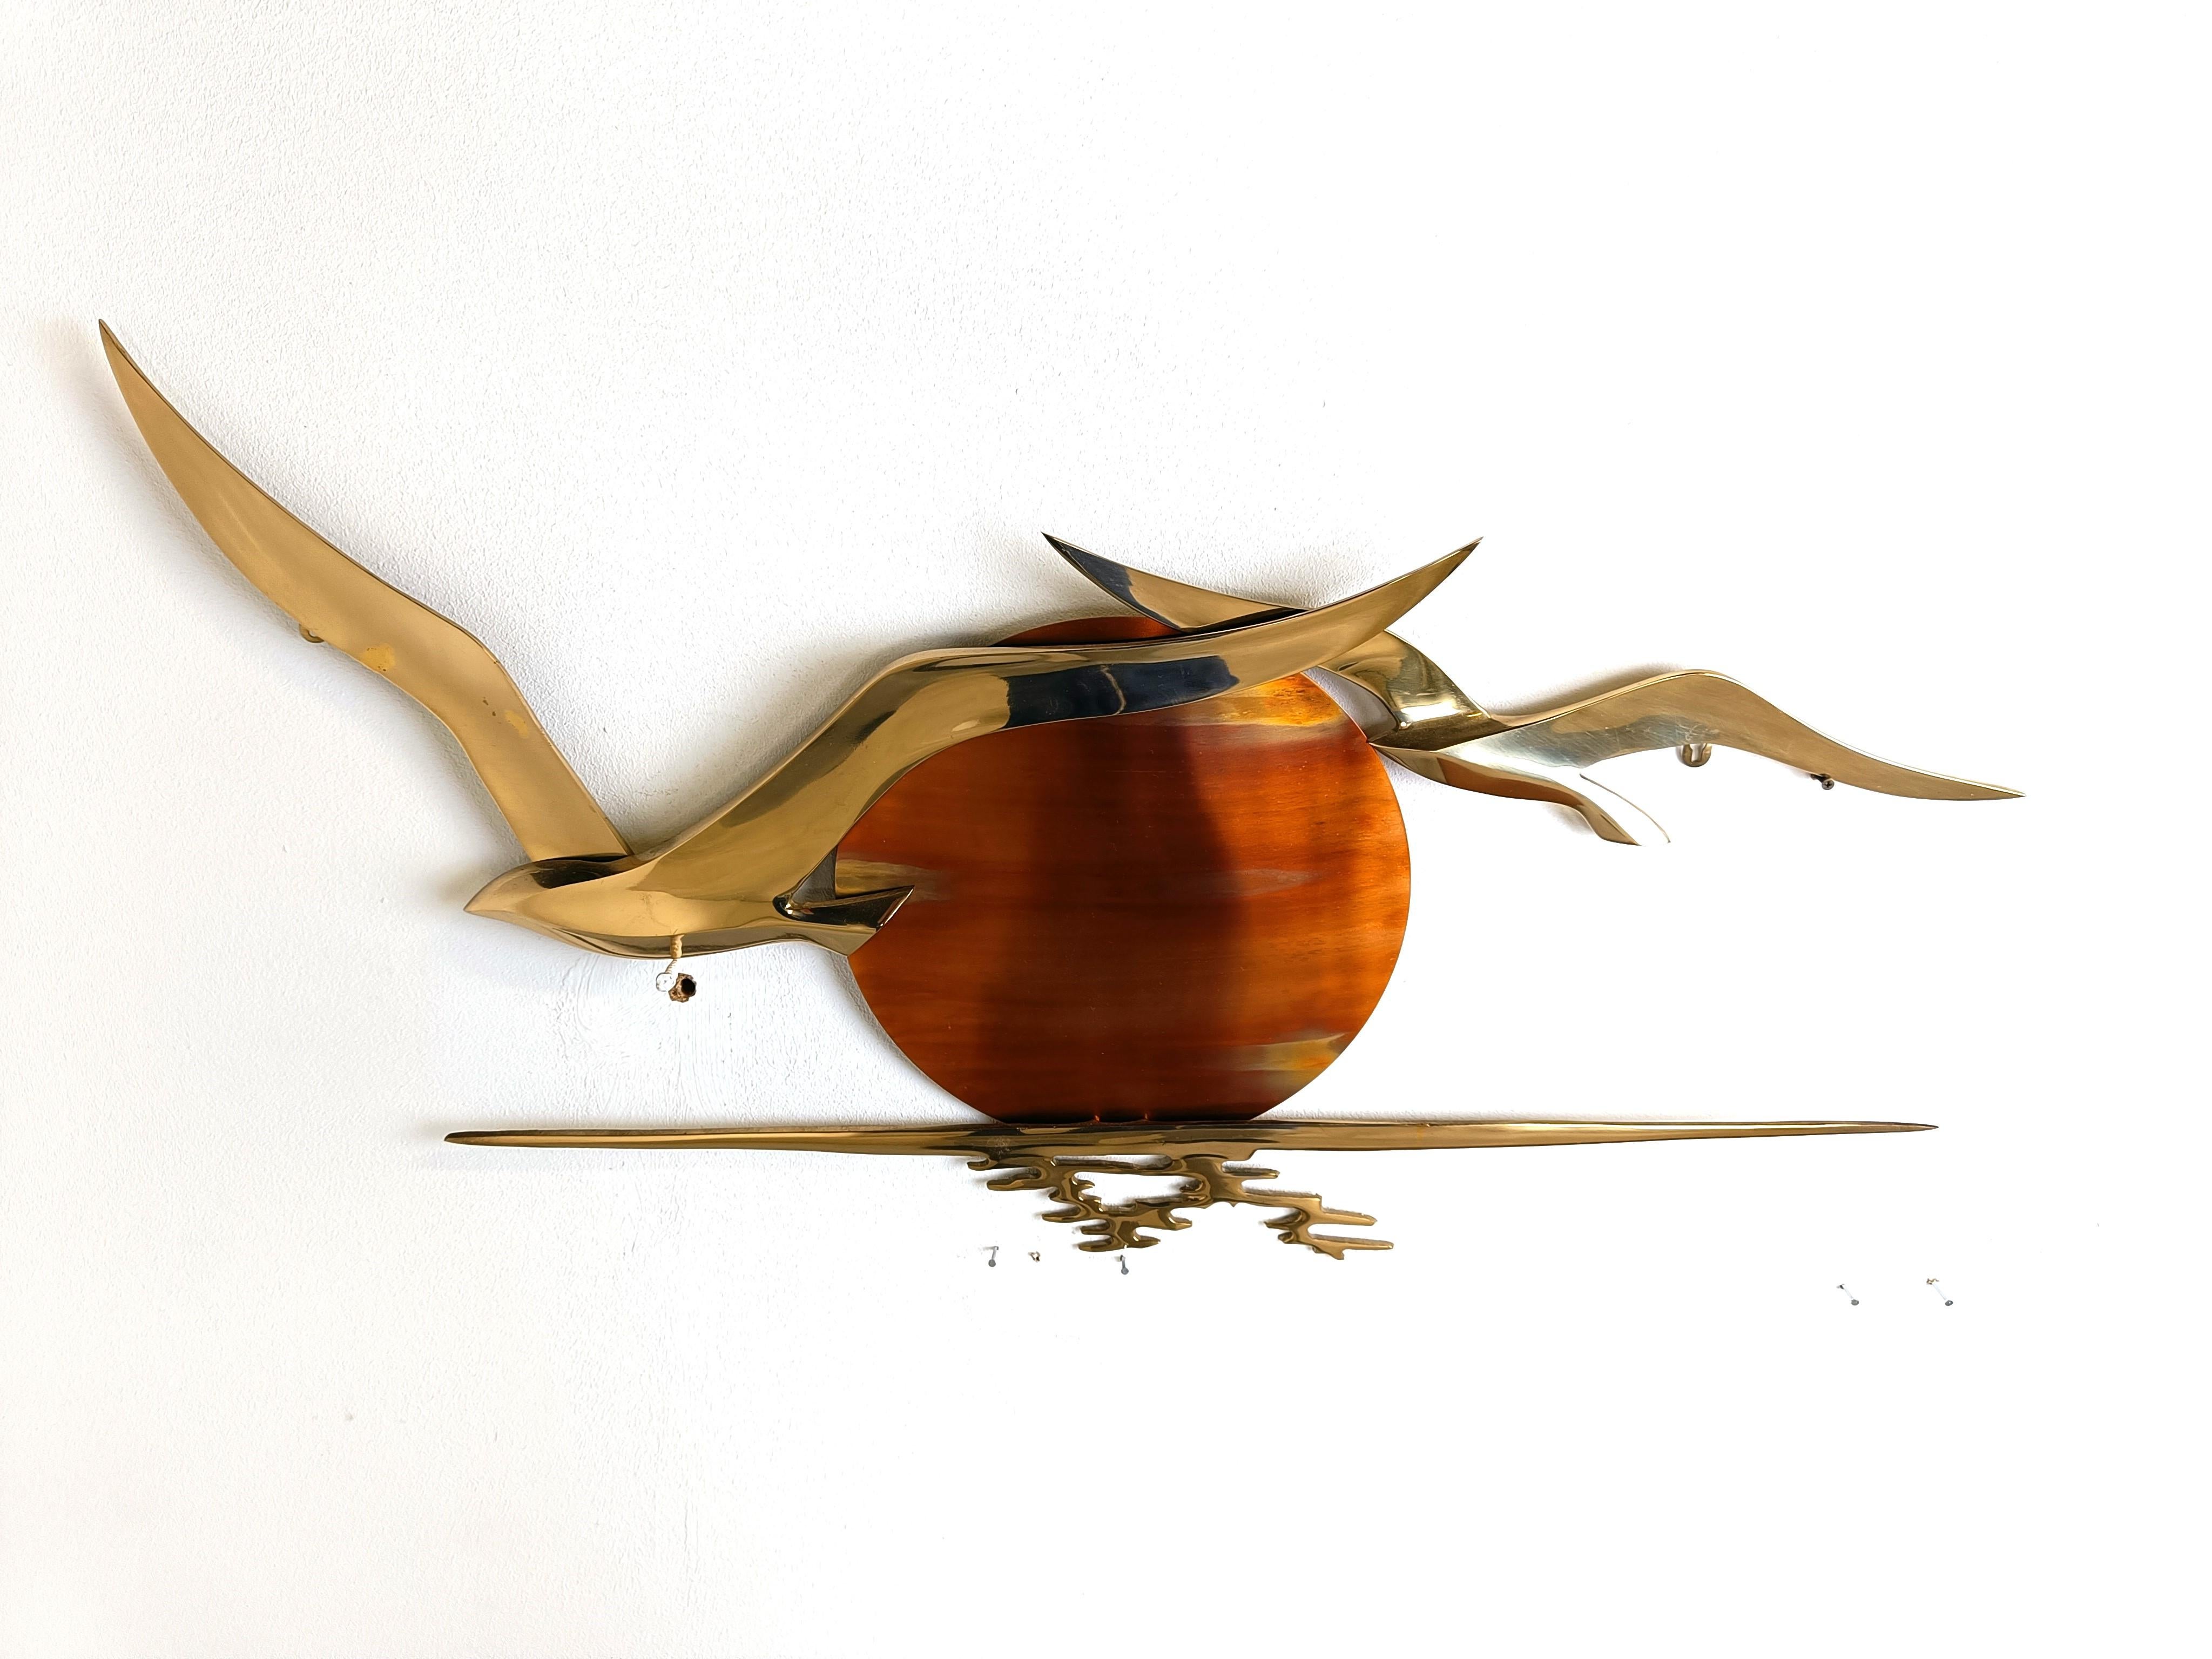 Mid century copper bird sculptures flying birds over the water with a sunset.

Very decorative wall sculpture. 

1970s - Belgium

Dimensions:
Height: 40cm
Width 80cm

Ref.: 201342

